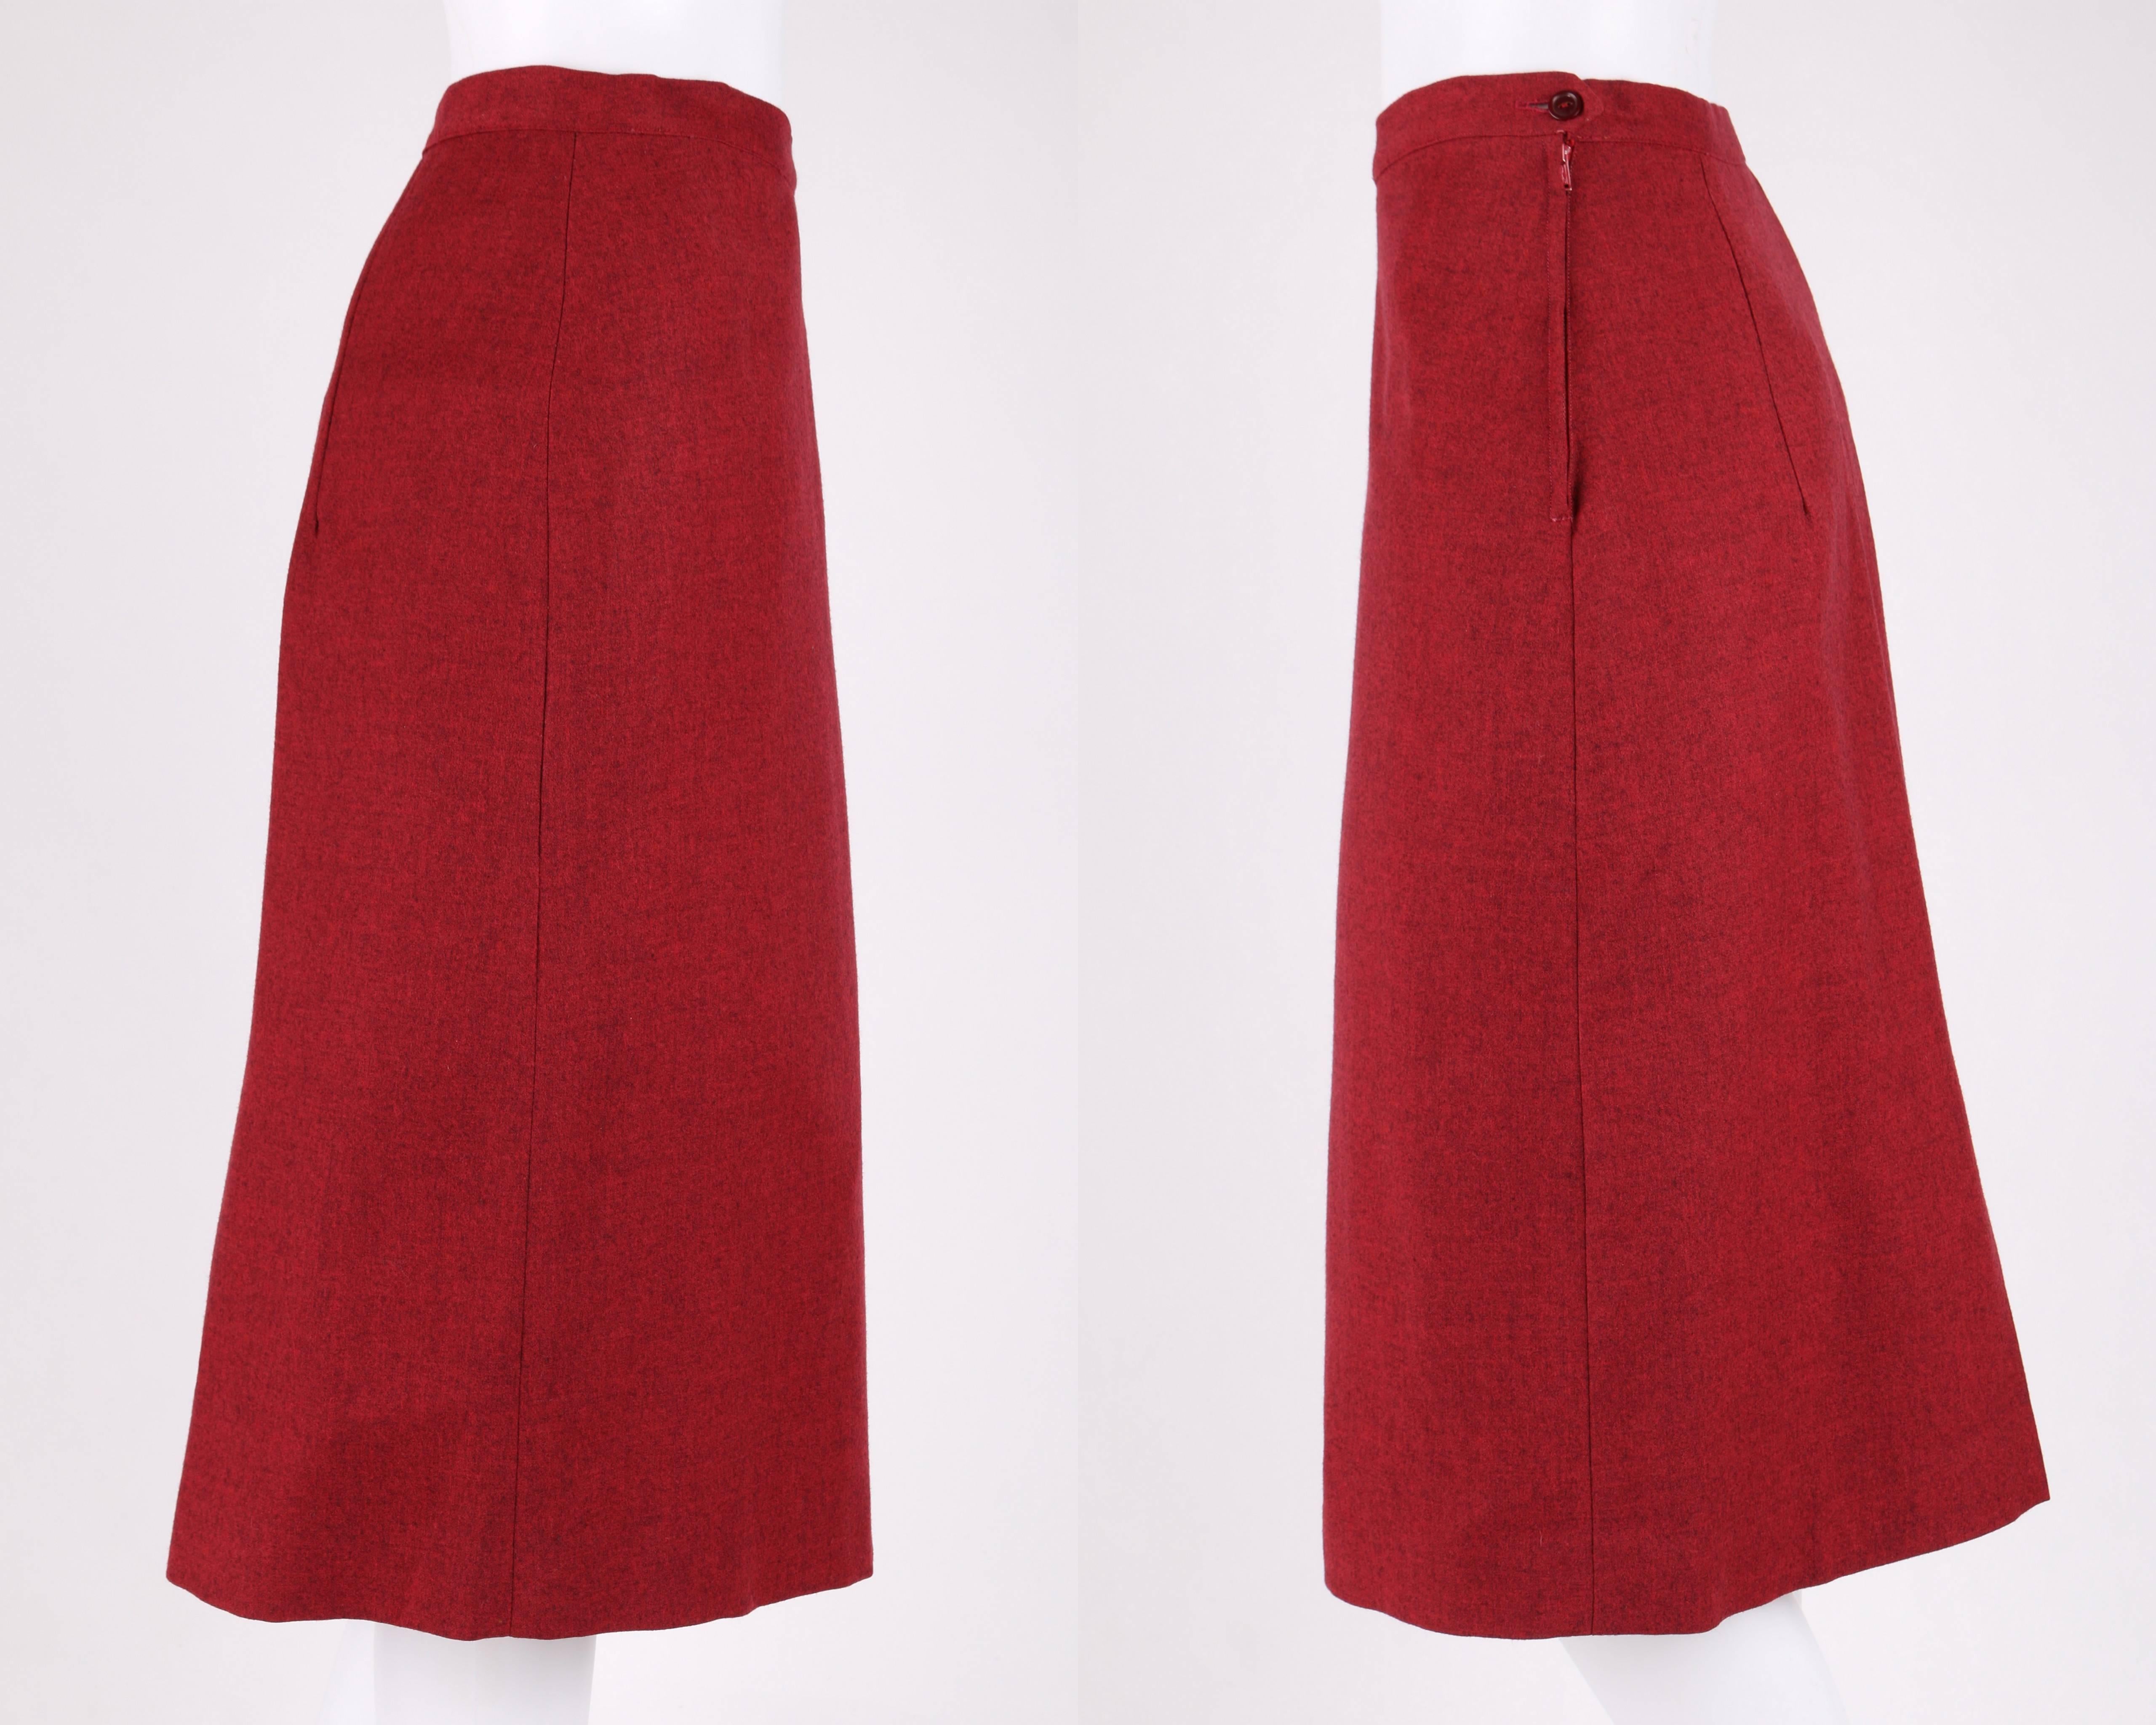 STYLED BY VENNE c.1940's 2 Piece Ruby Red Wool Embellished Blazer Skirt Suit 3